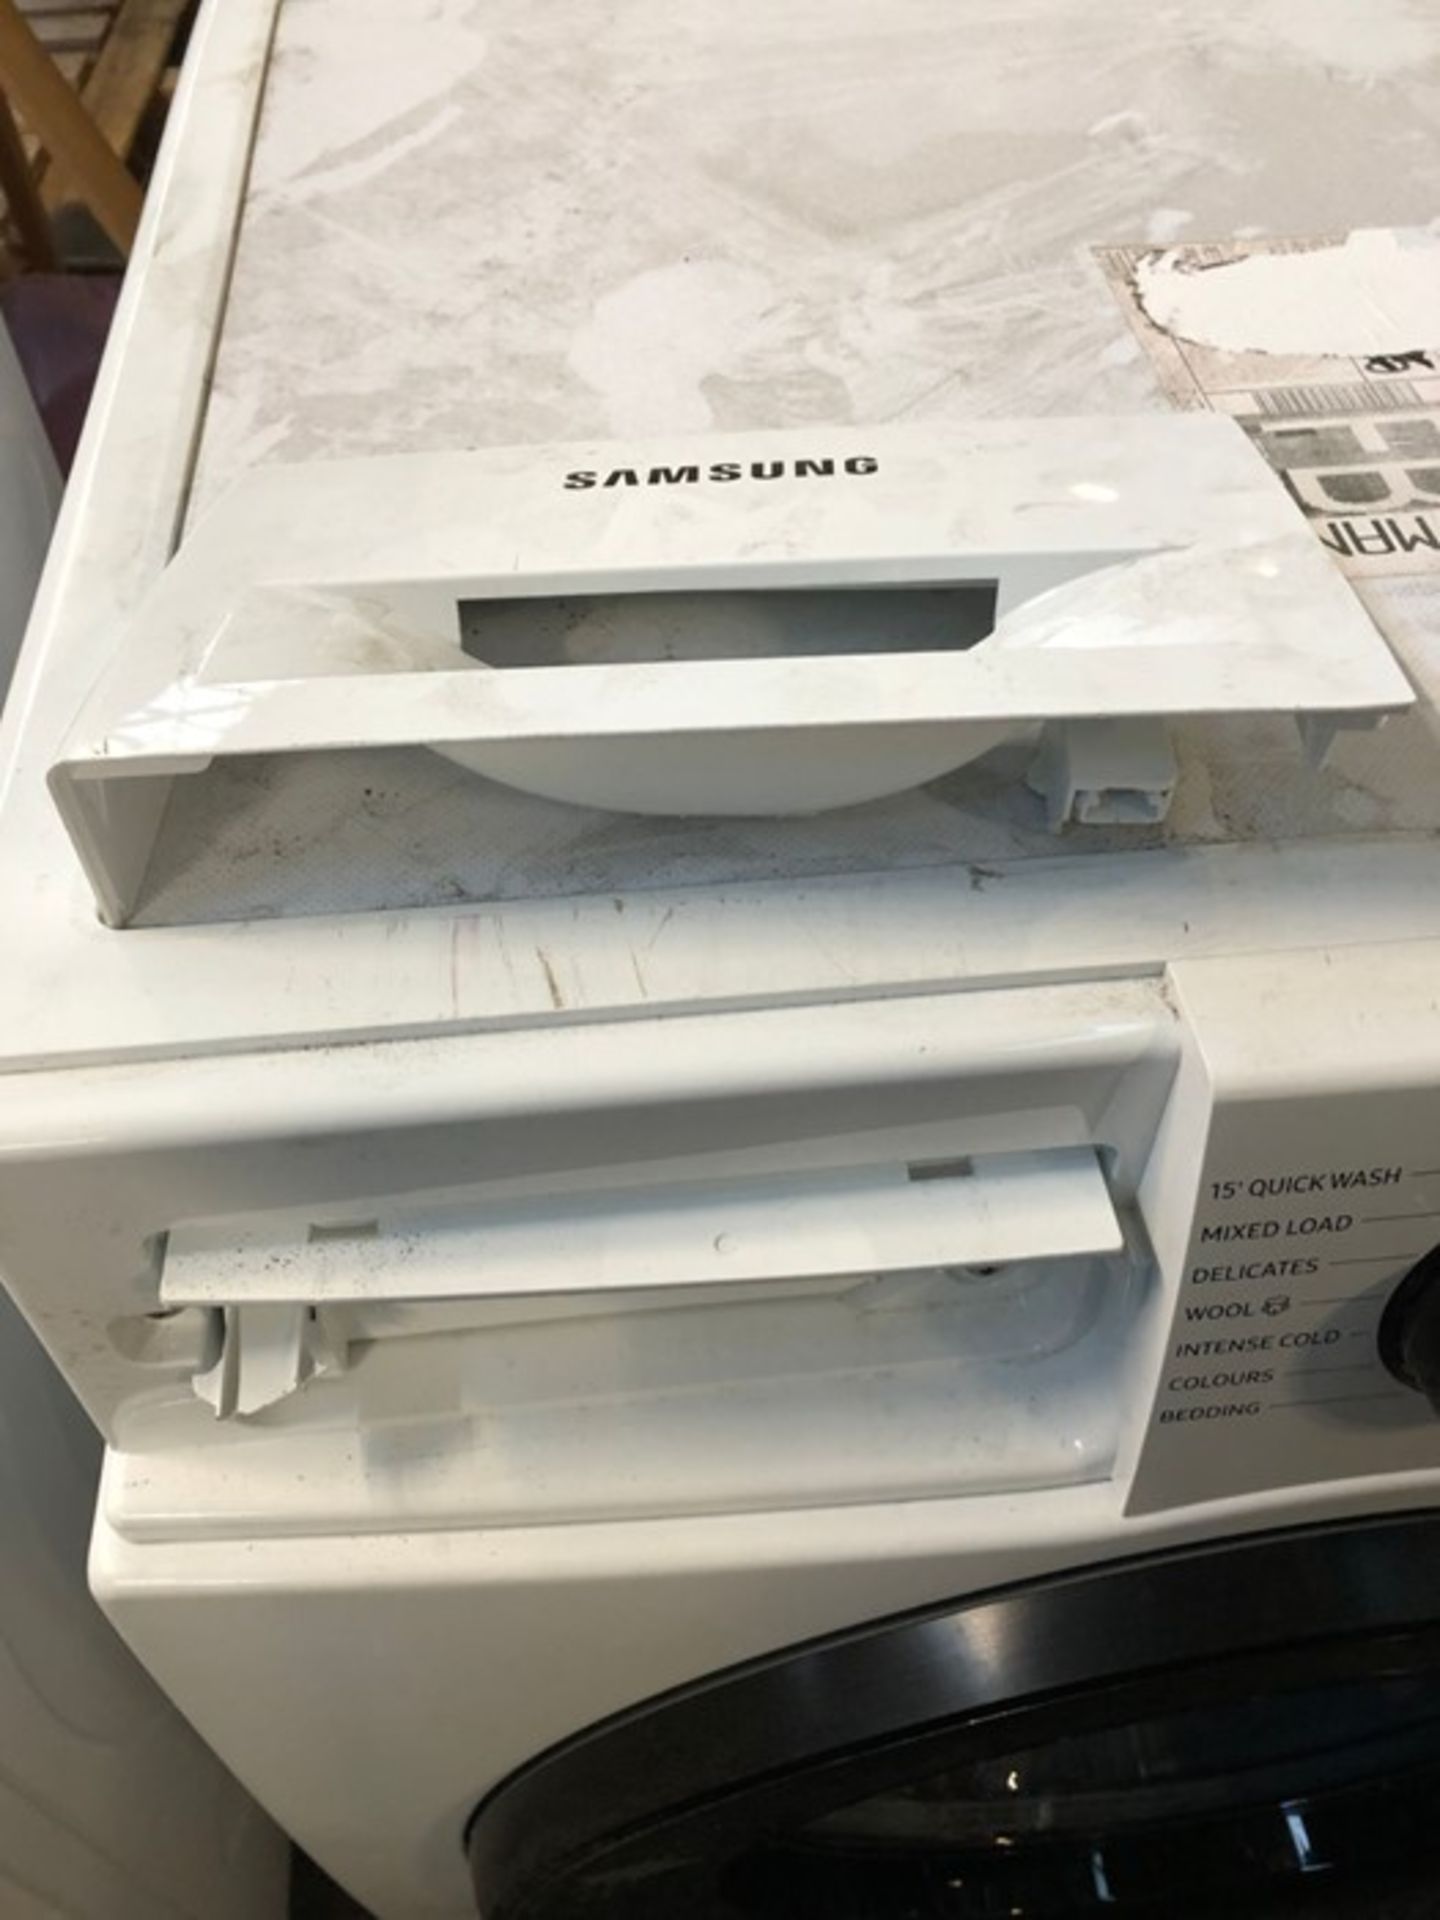 SAMSUNG WASHING MACHINE - WW80TA046AE / RRP £399.00 / UNTESTED, LIGHTLY USED, DETERGENT DRAWER - Image 3 of 3